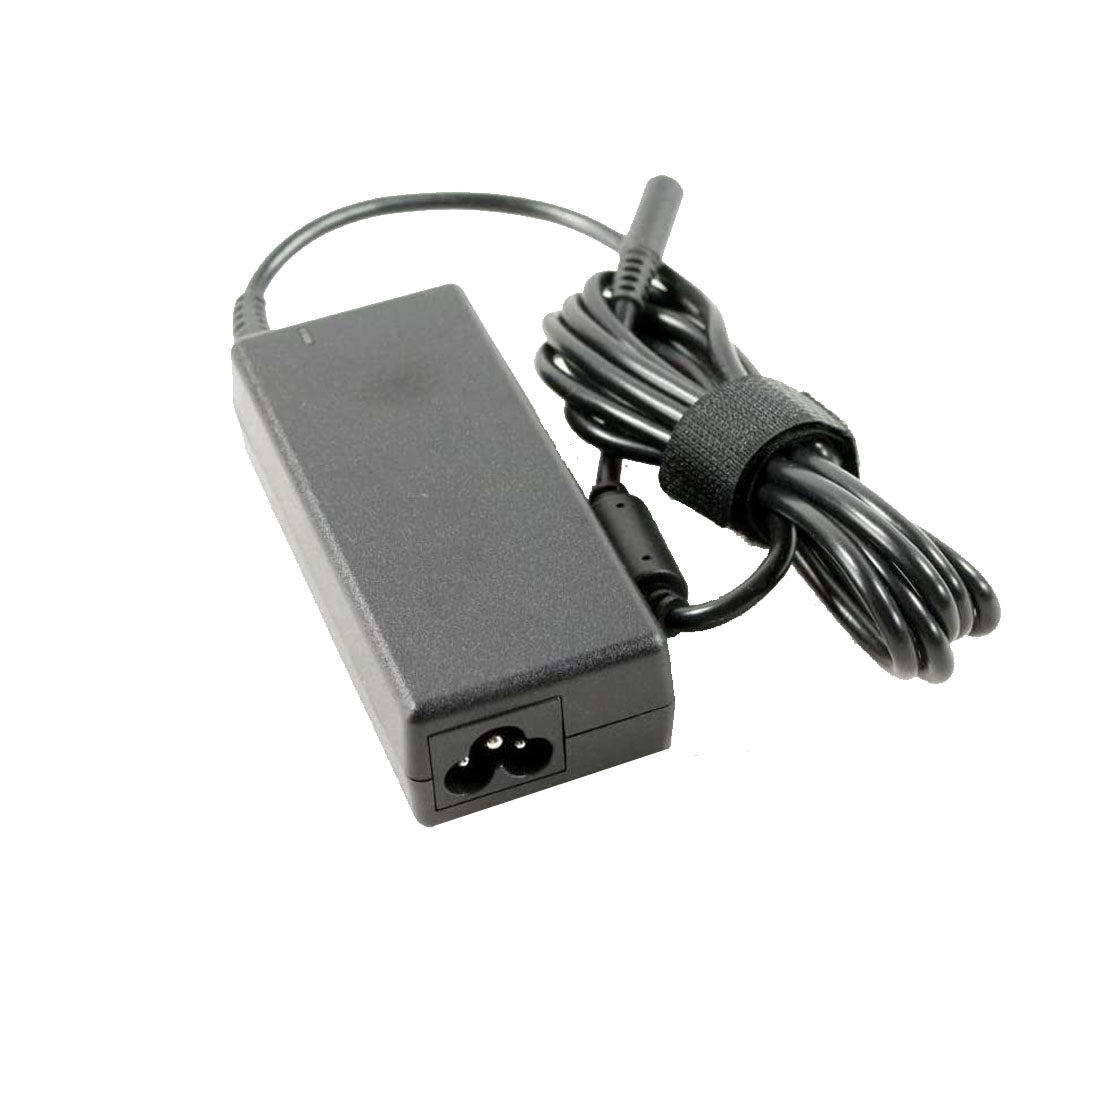 Dell Original 65W 19.5V 4.5mm Pin Laptop Charger Adapter for Vostro 15 5568 With Power Cord